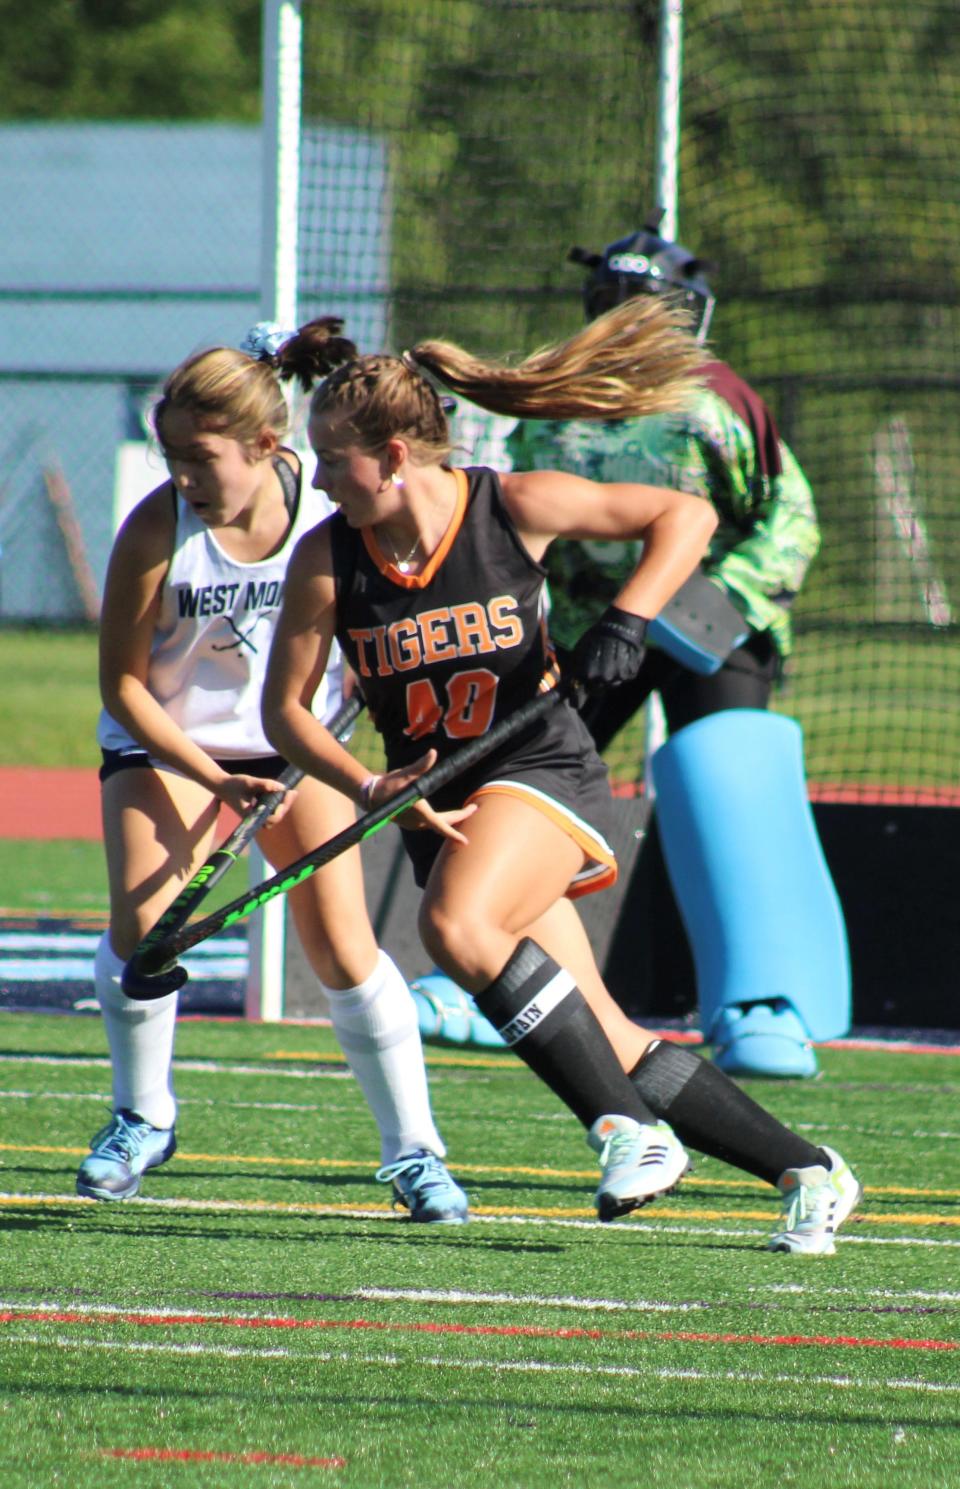 Hackettstown senior Kiara Koeller broke the single-season school record for goals last fall. She has now broken the career goal-scoring record, which was held by her former club coach, Heather Kozimor.